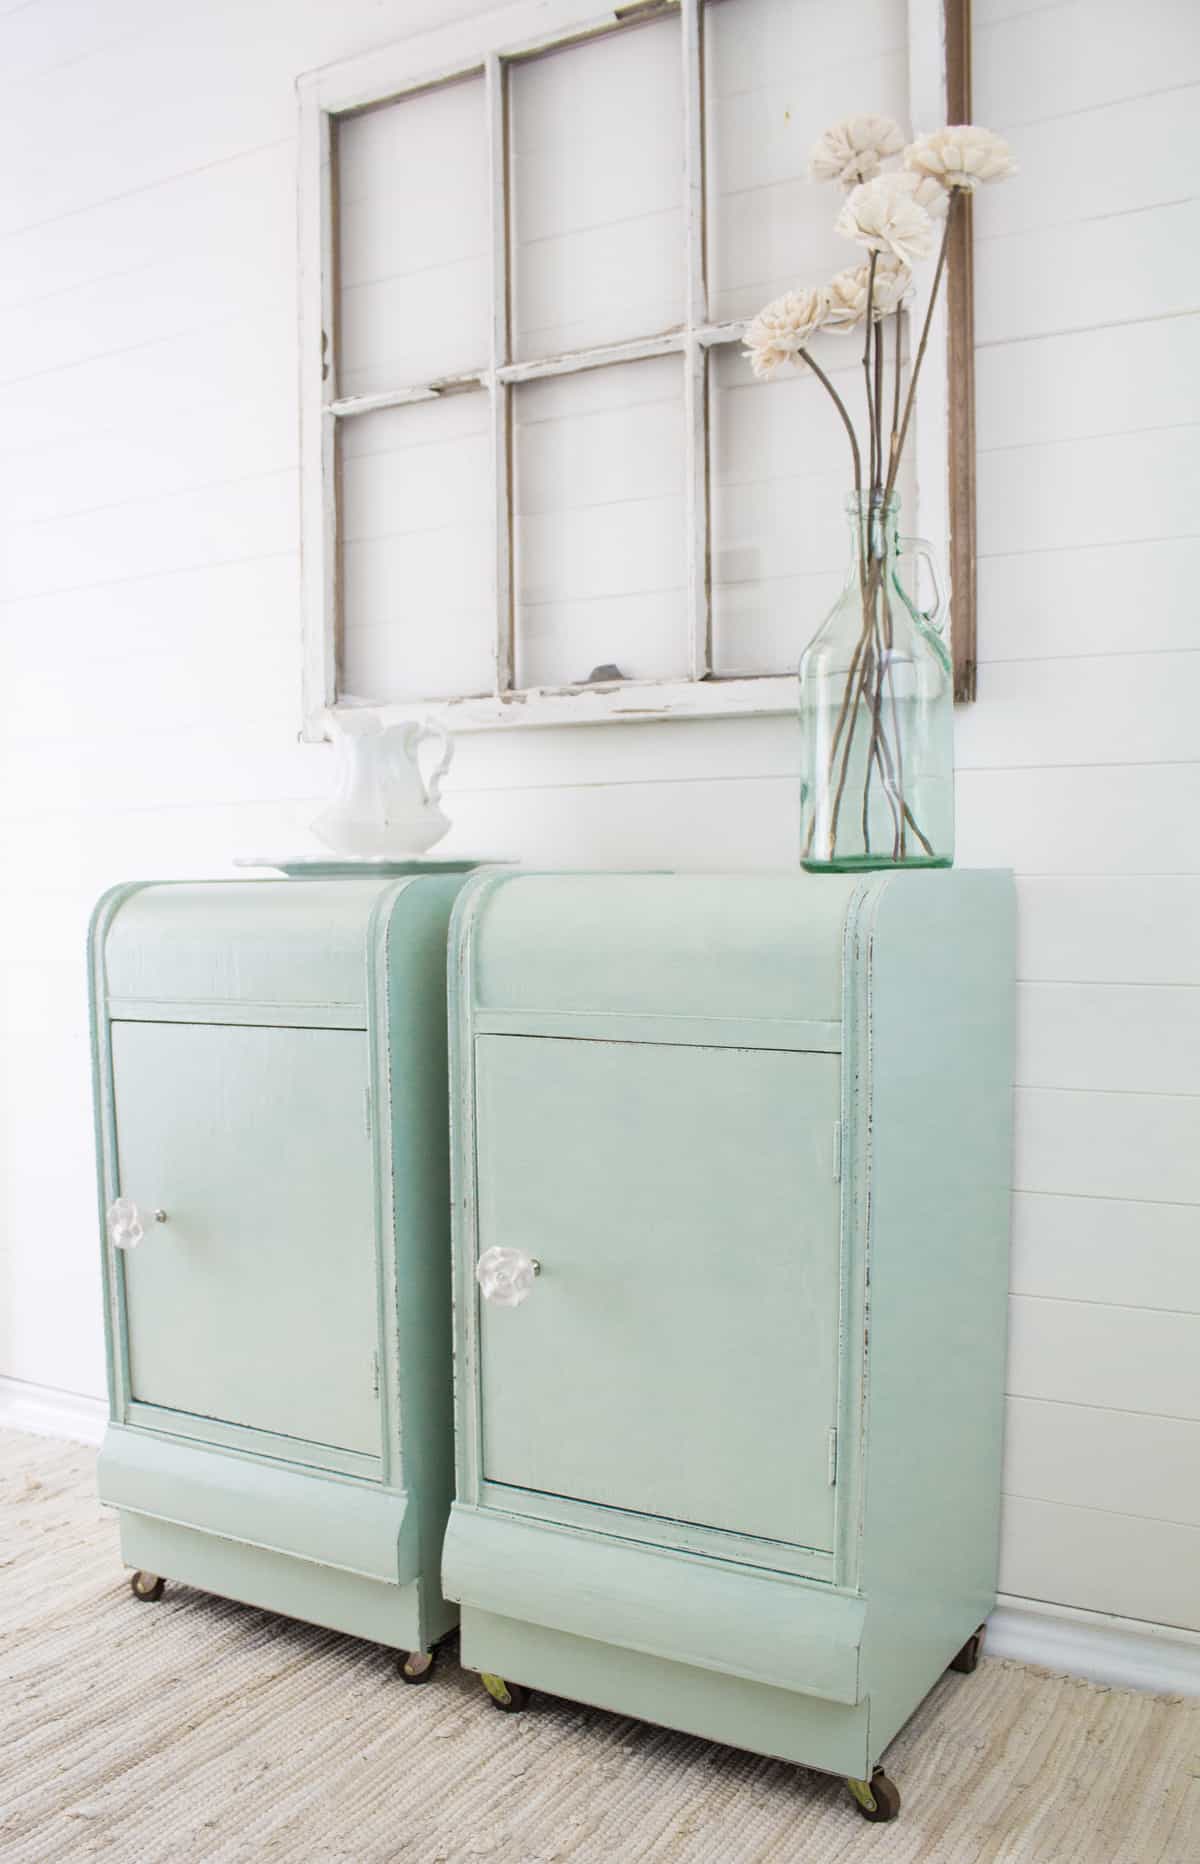 Deco End Tables in Happy Hour #green #mint #homedecor #furniturepaint #paintedfurniture #chalkpaint #nightstands #farmhouse #countrychicpaint - blog.countrychicpaint.com